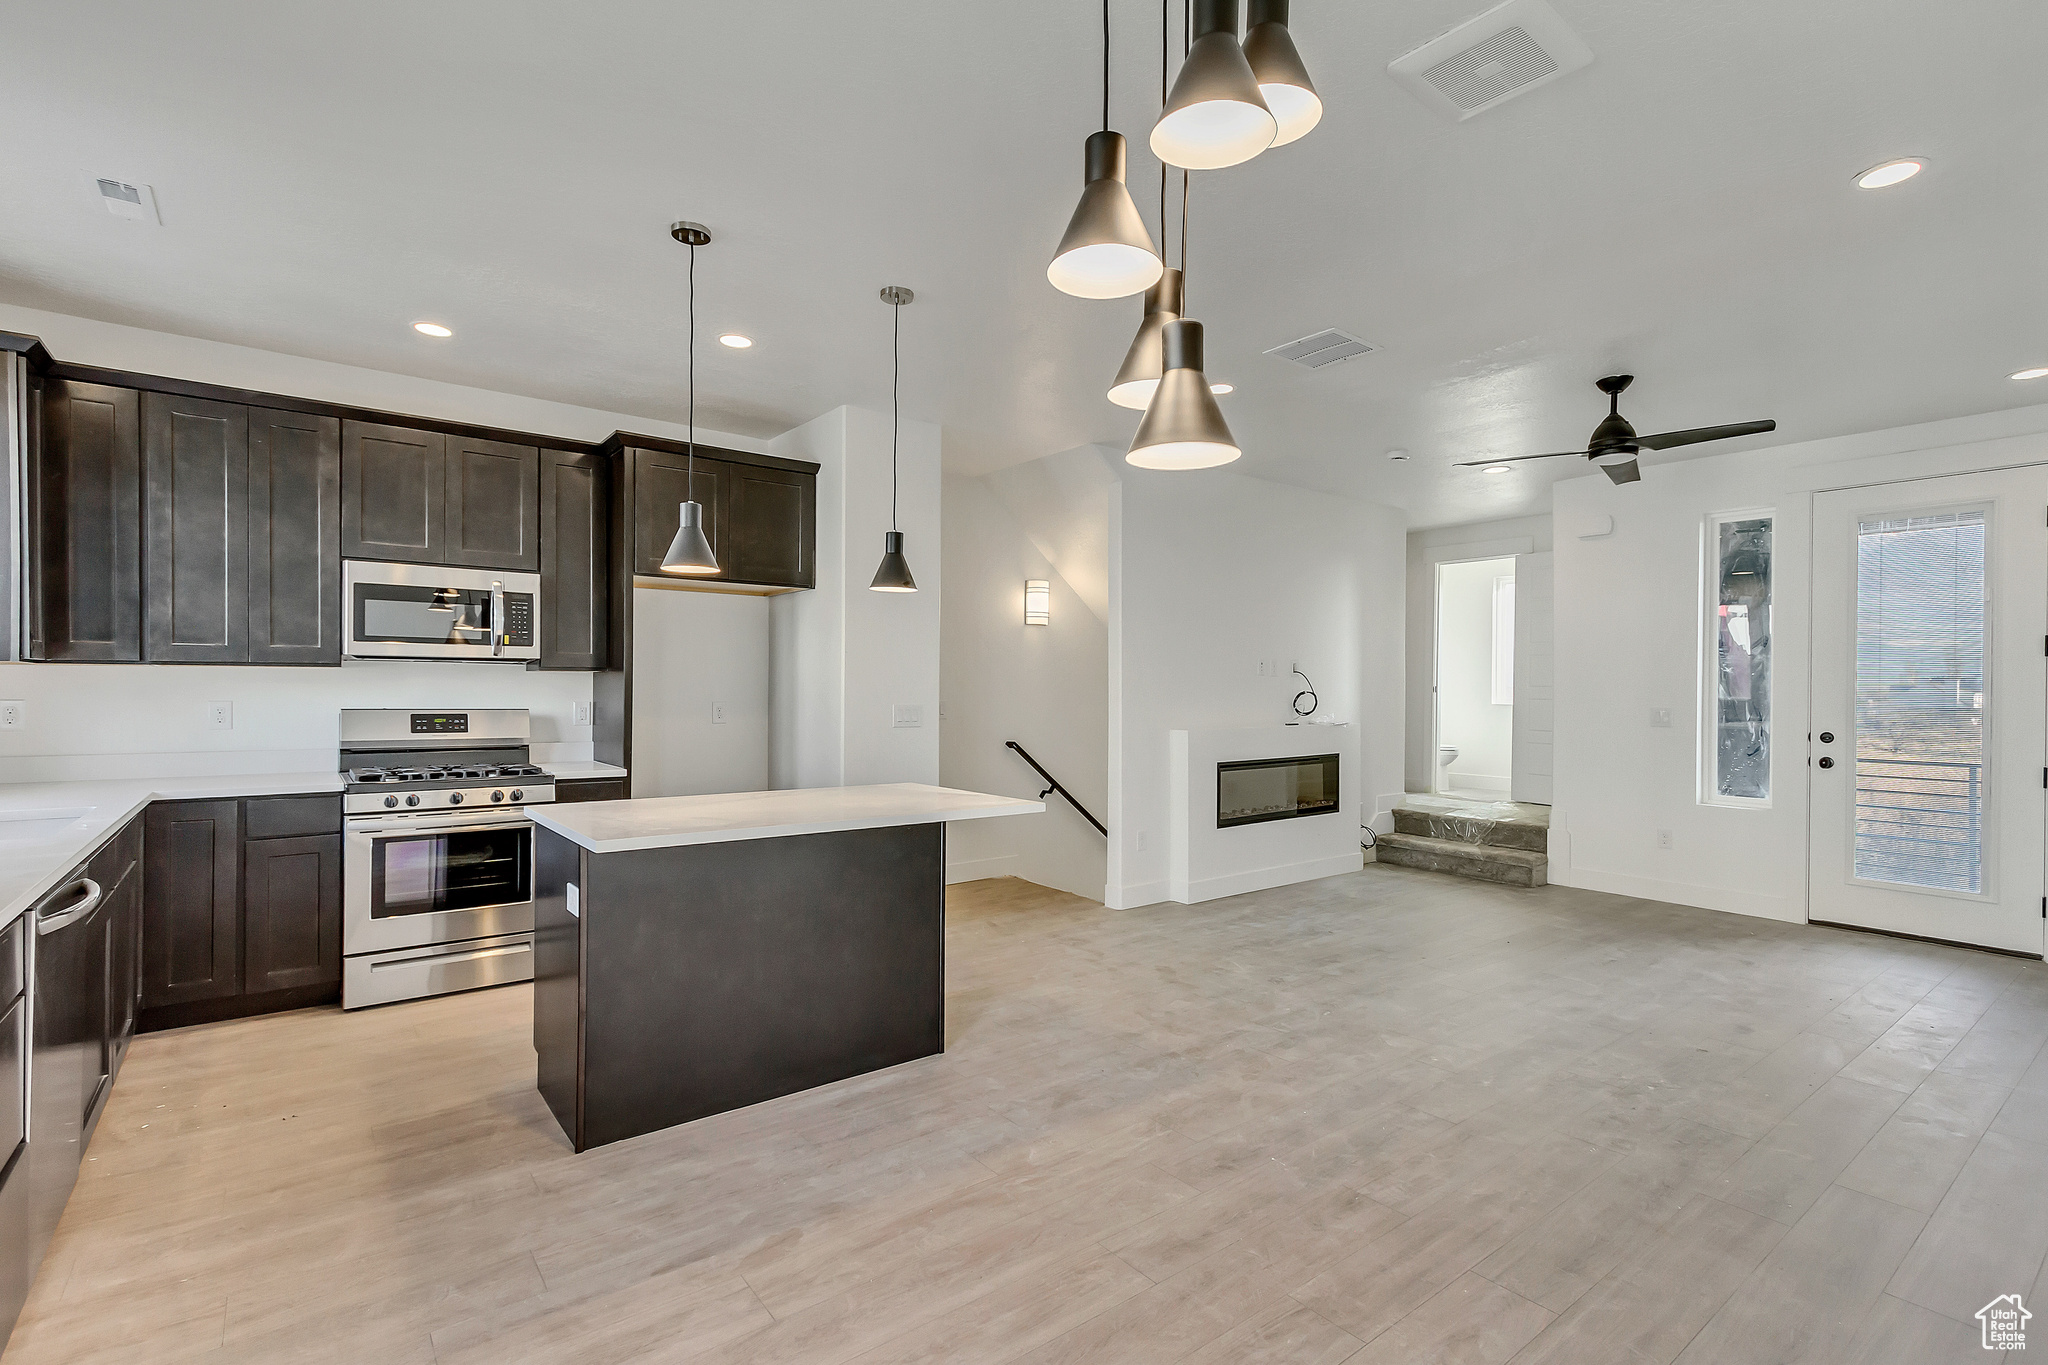 Kitchen featuring a kitchen island, light hardwood / wood-style flooring, stainless steel appliances, ceiling fan, and pendant lighting